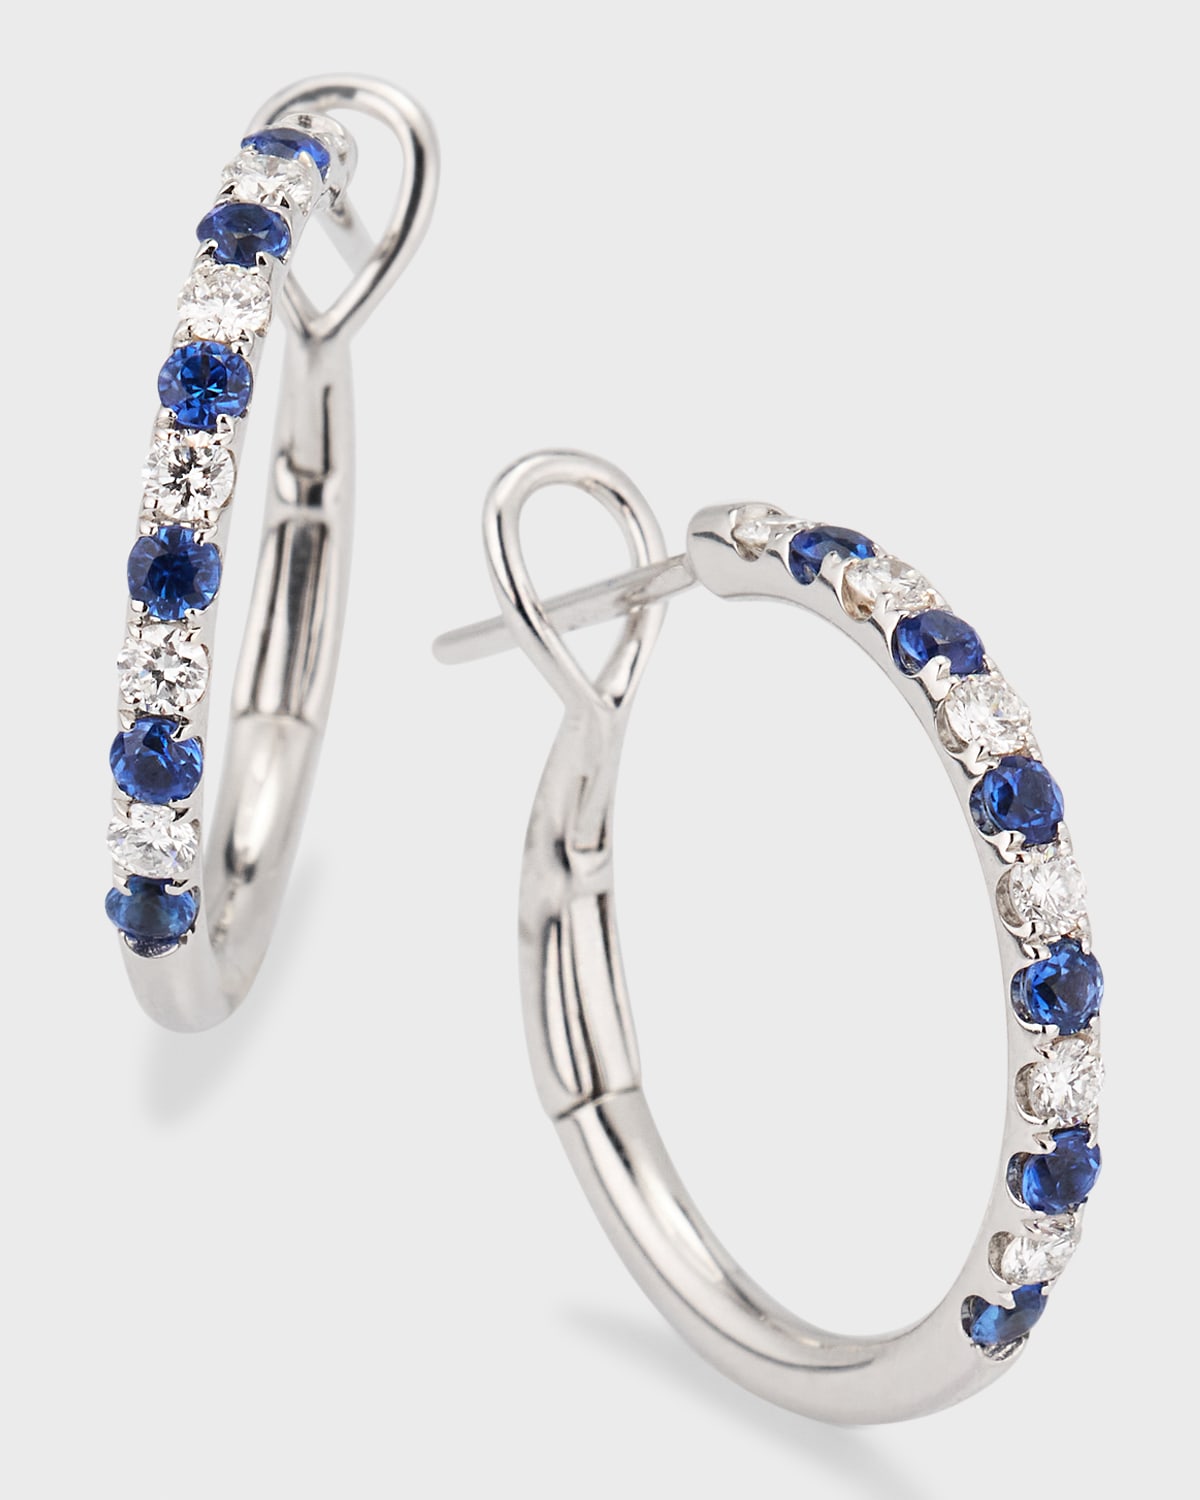 Frederic Sage 18k White Gold Small Alternating Diamond And Sapphire Hoop Earrings